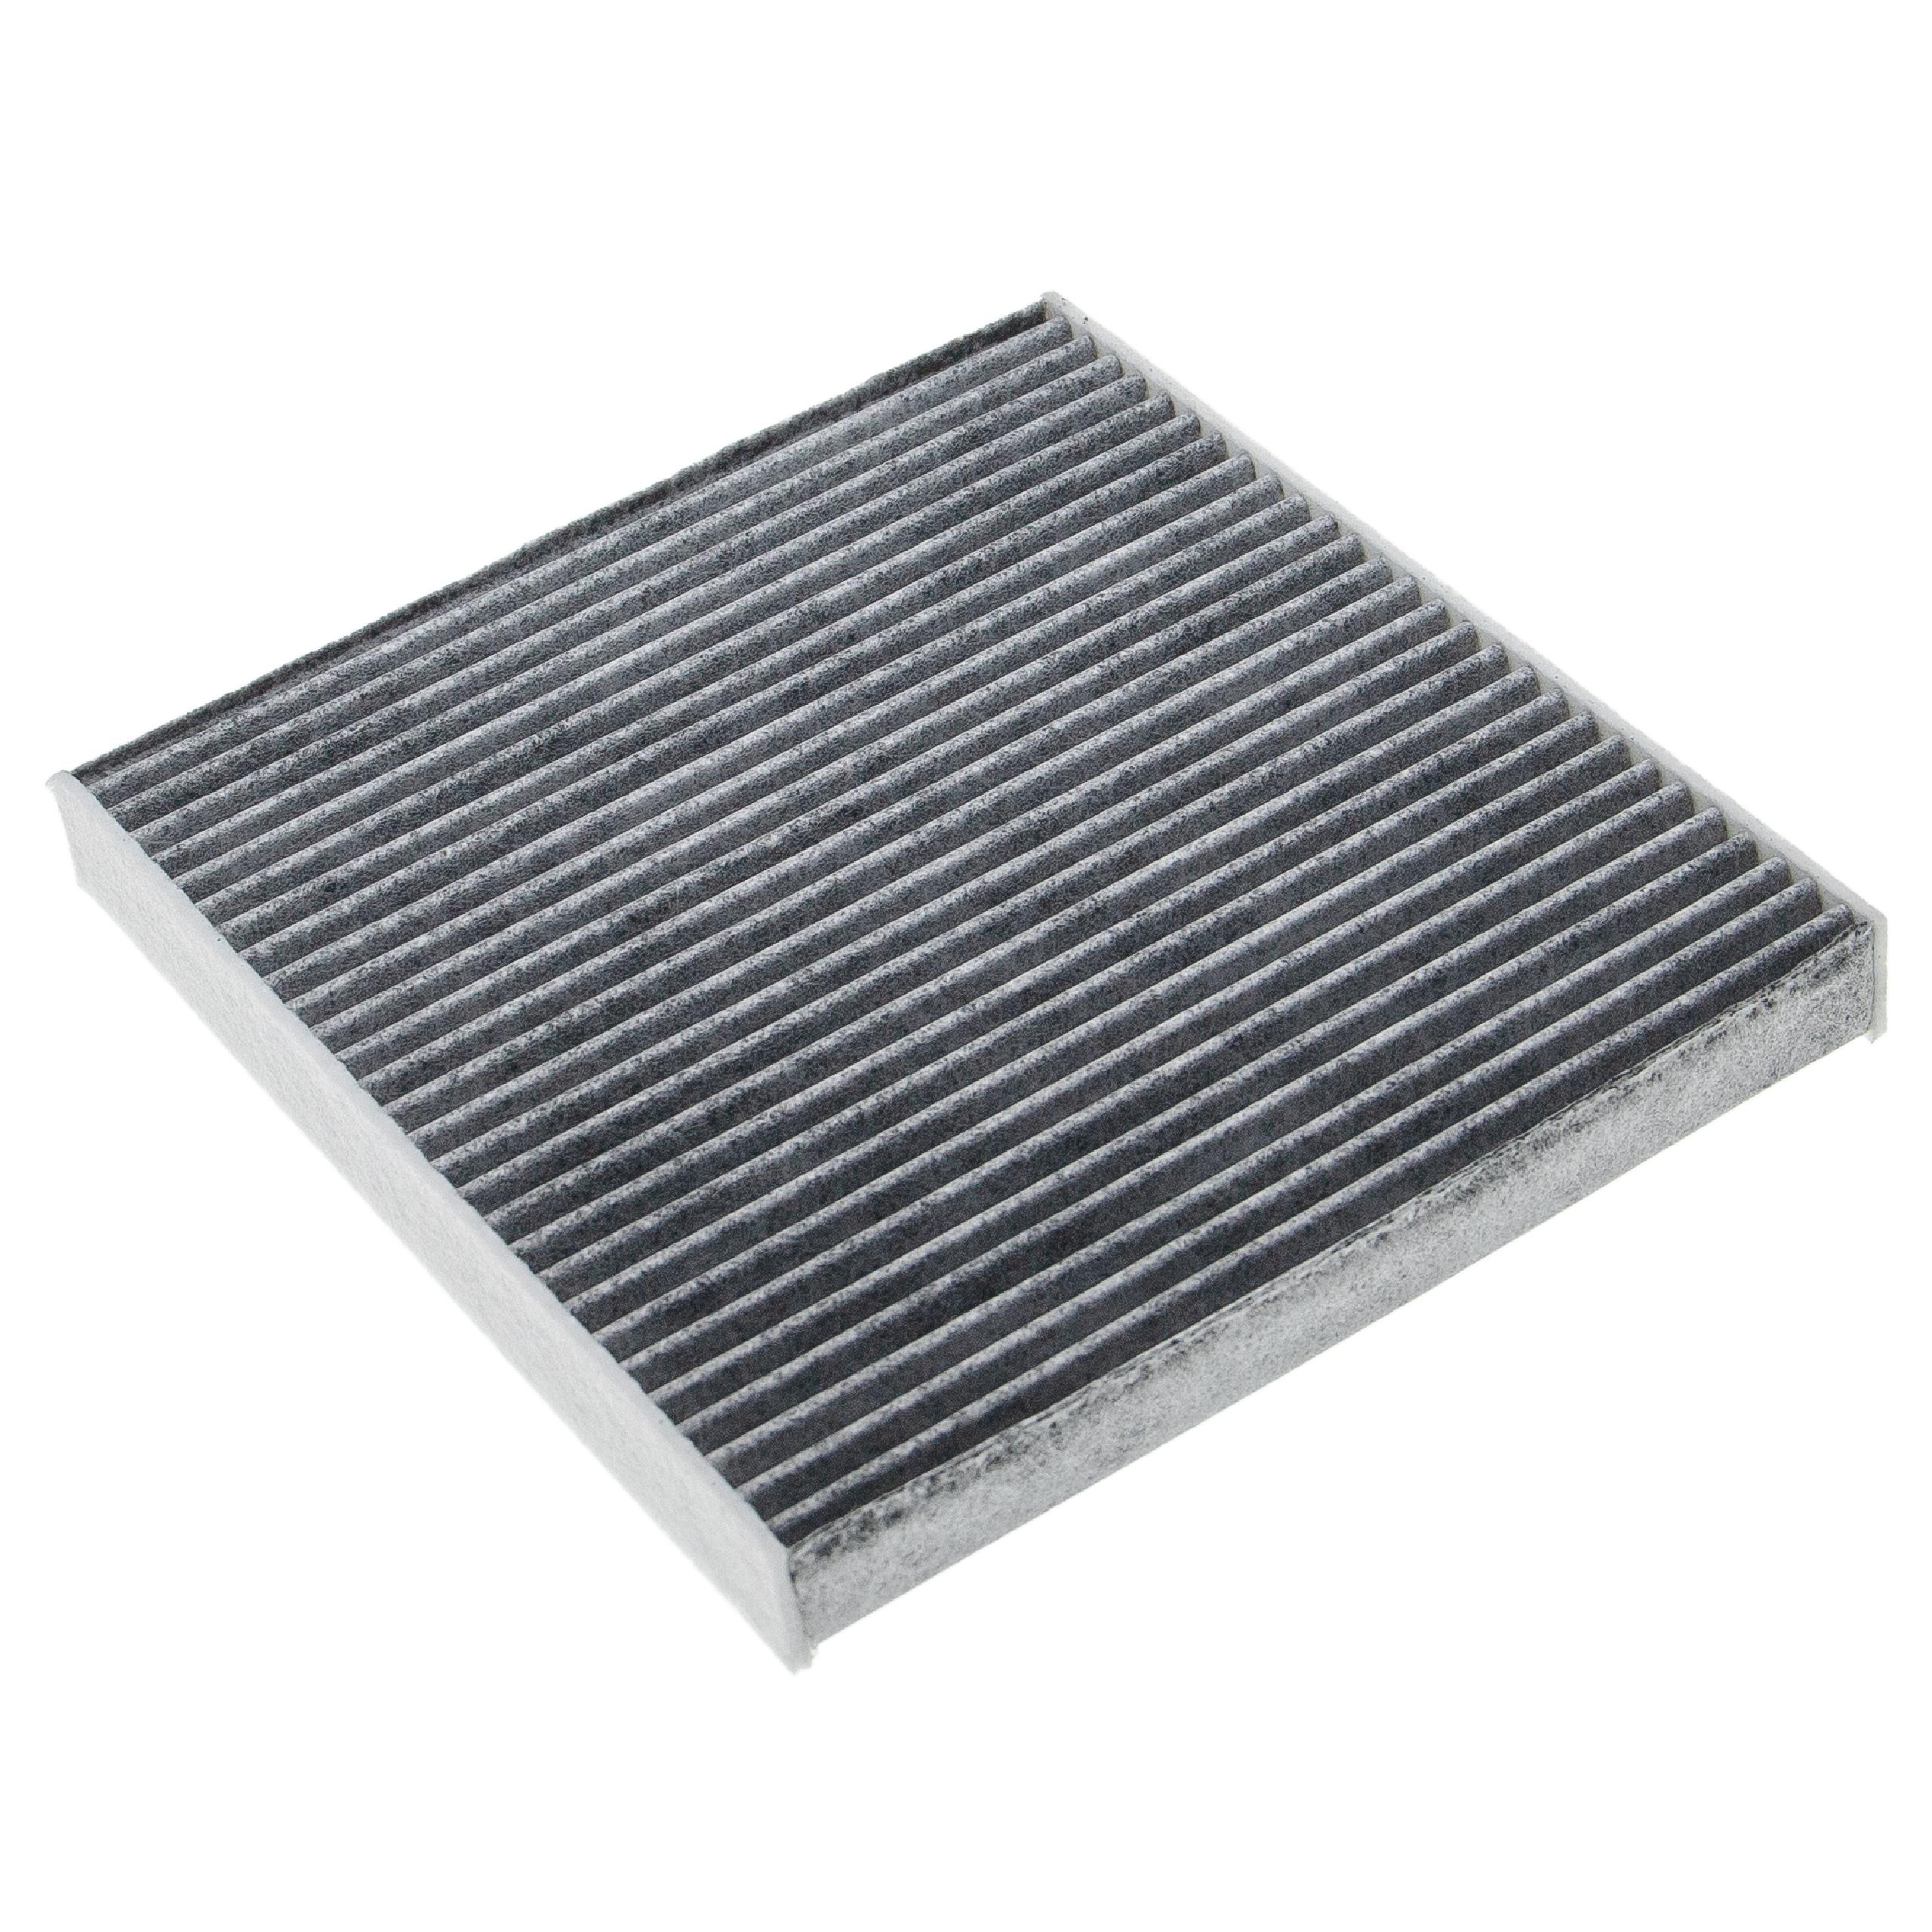 Cabin Air Filter replaces Alco Filter MS-6459C etc.